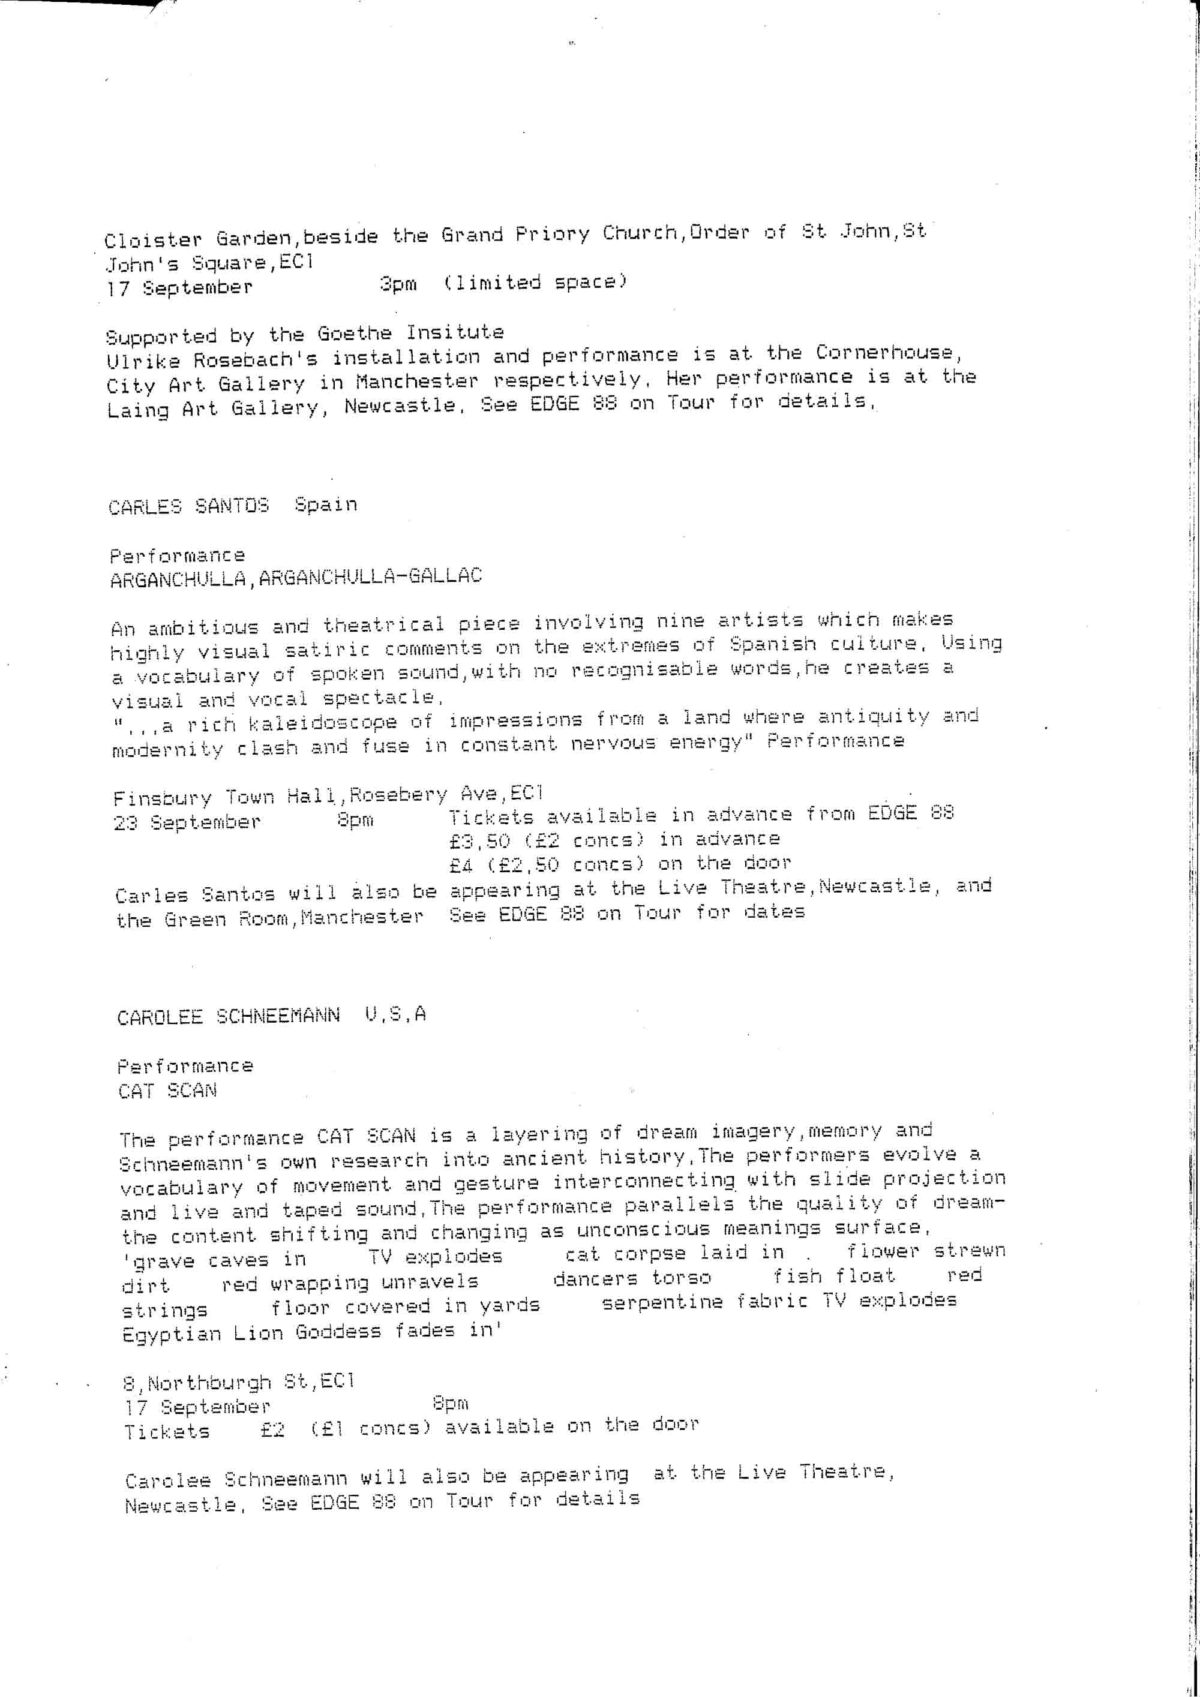 Full Programme Details, 1988 (Page 8 of 13)